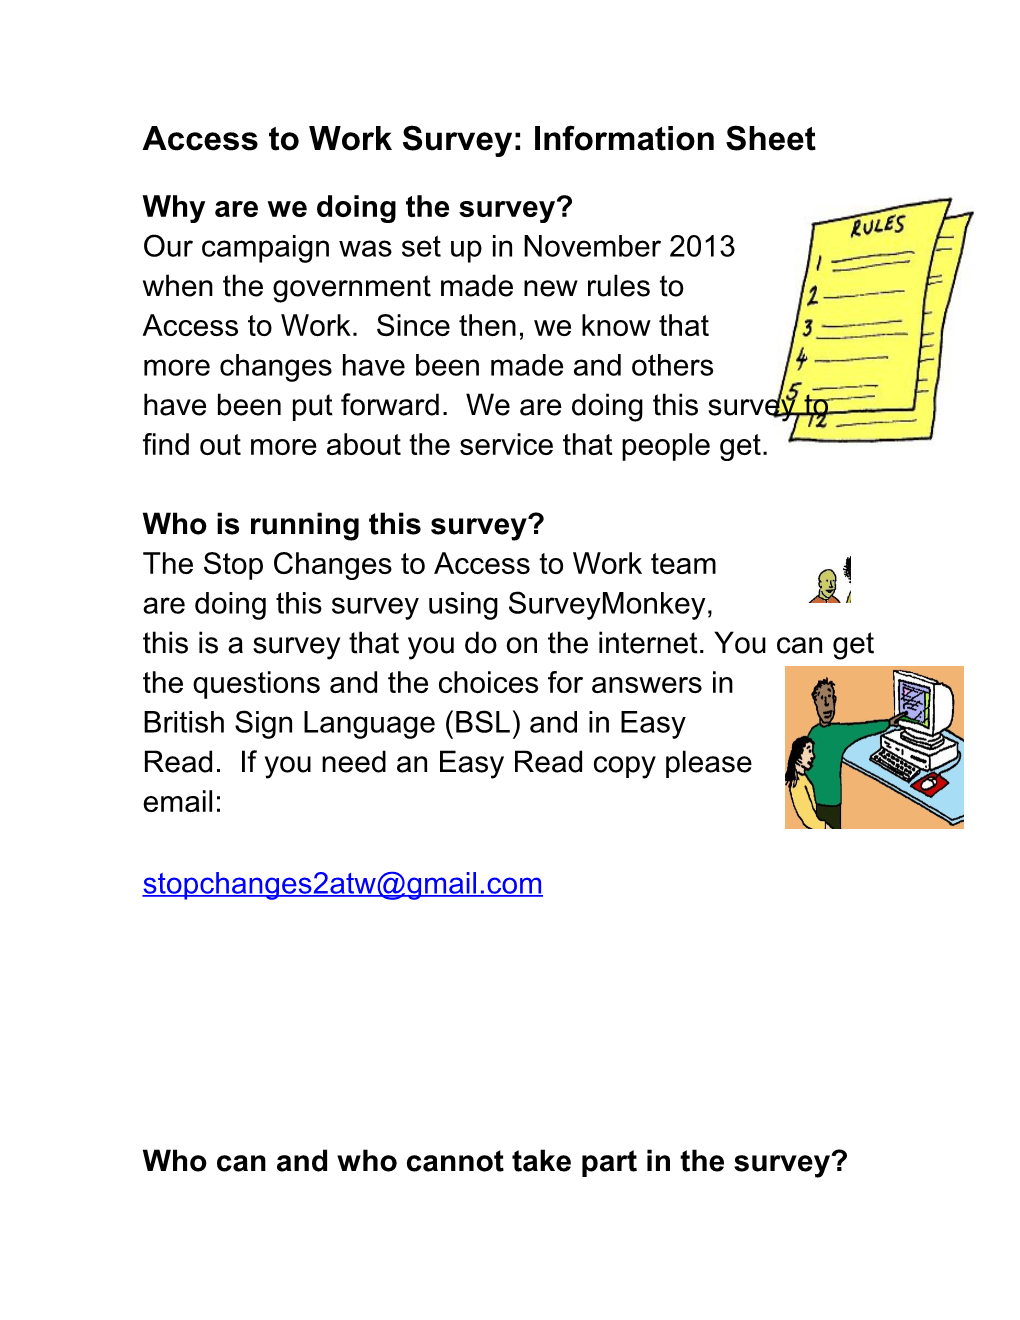 Who Can and Who Cannot Take Part in the Survey?